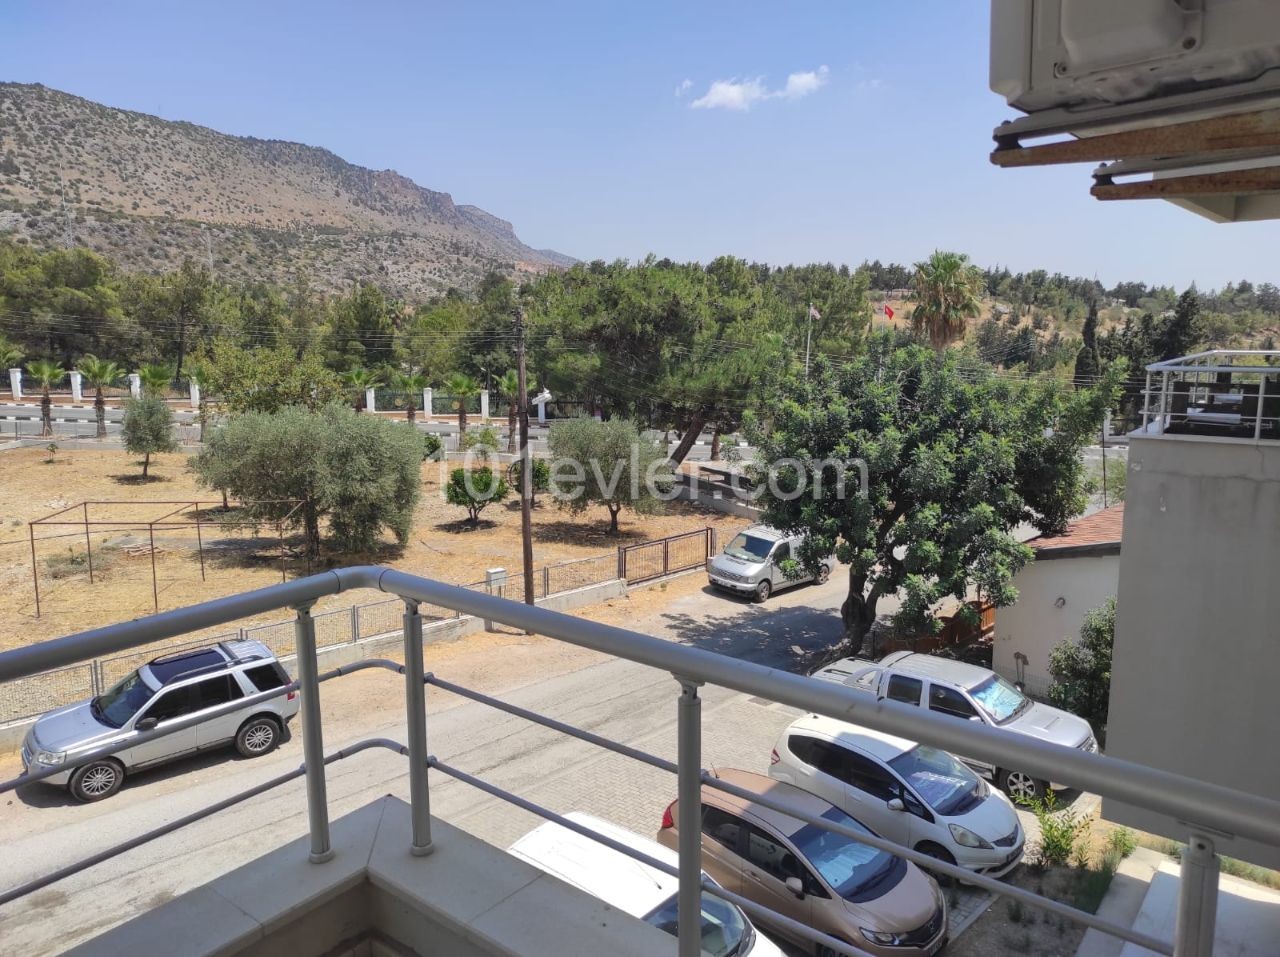 3+ 1 Apartments for Sale in Kyrenia Bosphorus without Turkish Goods 68,000 STG ** 